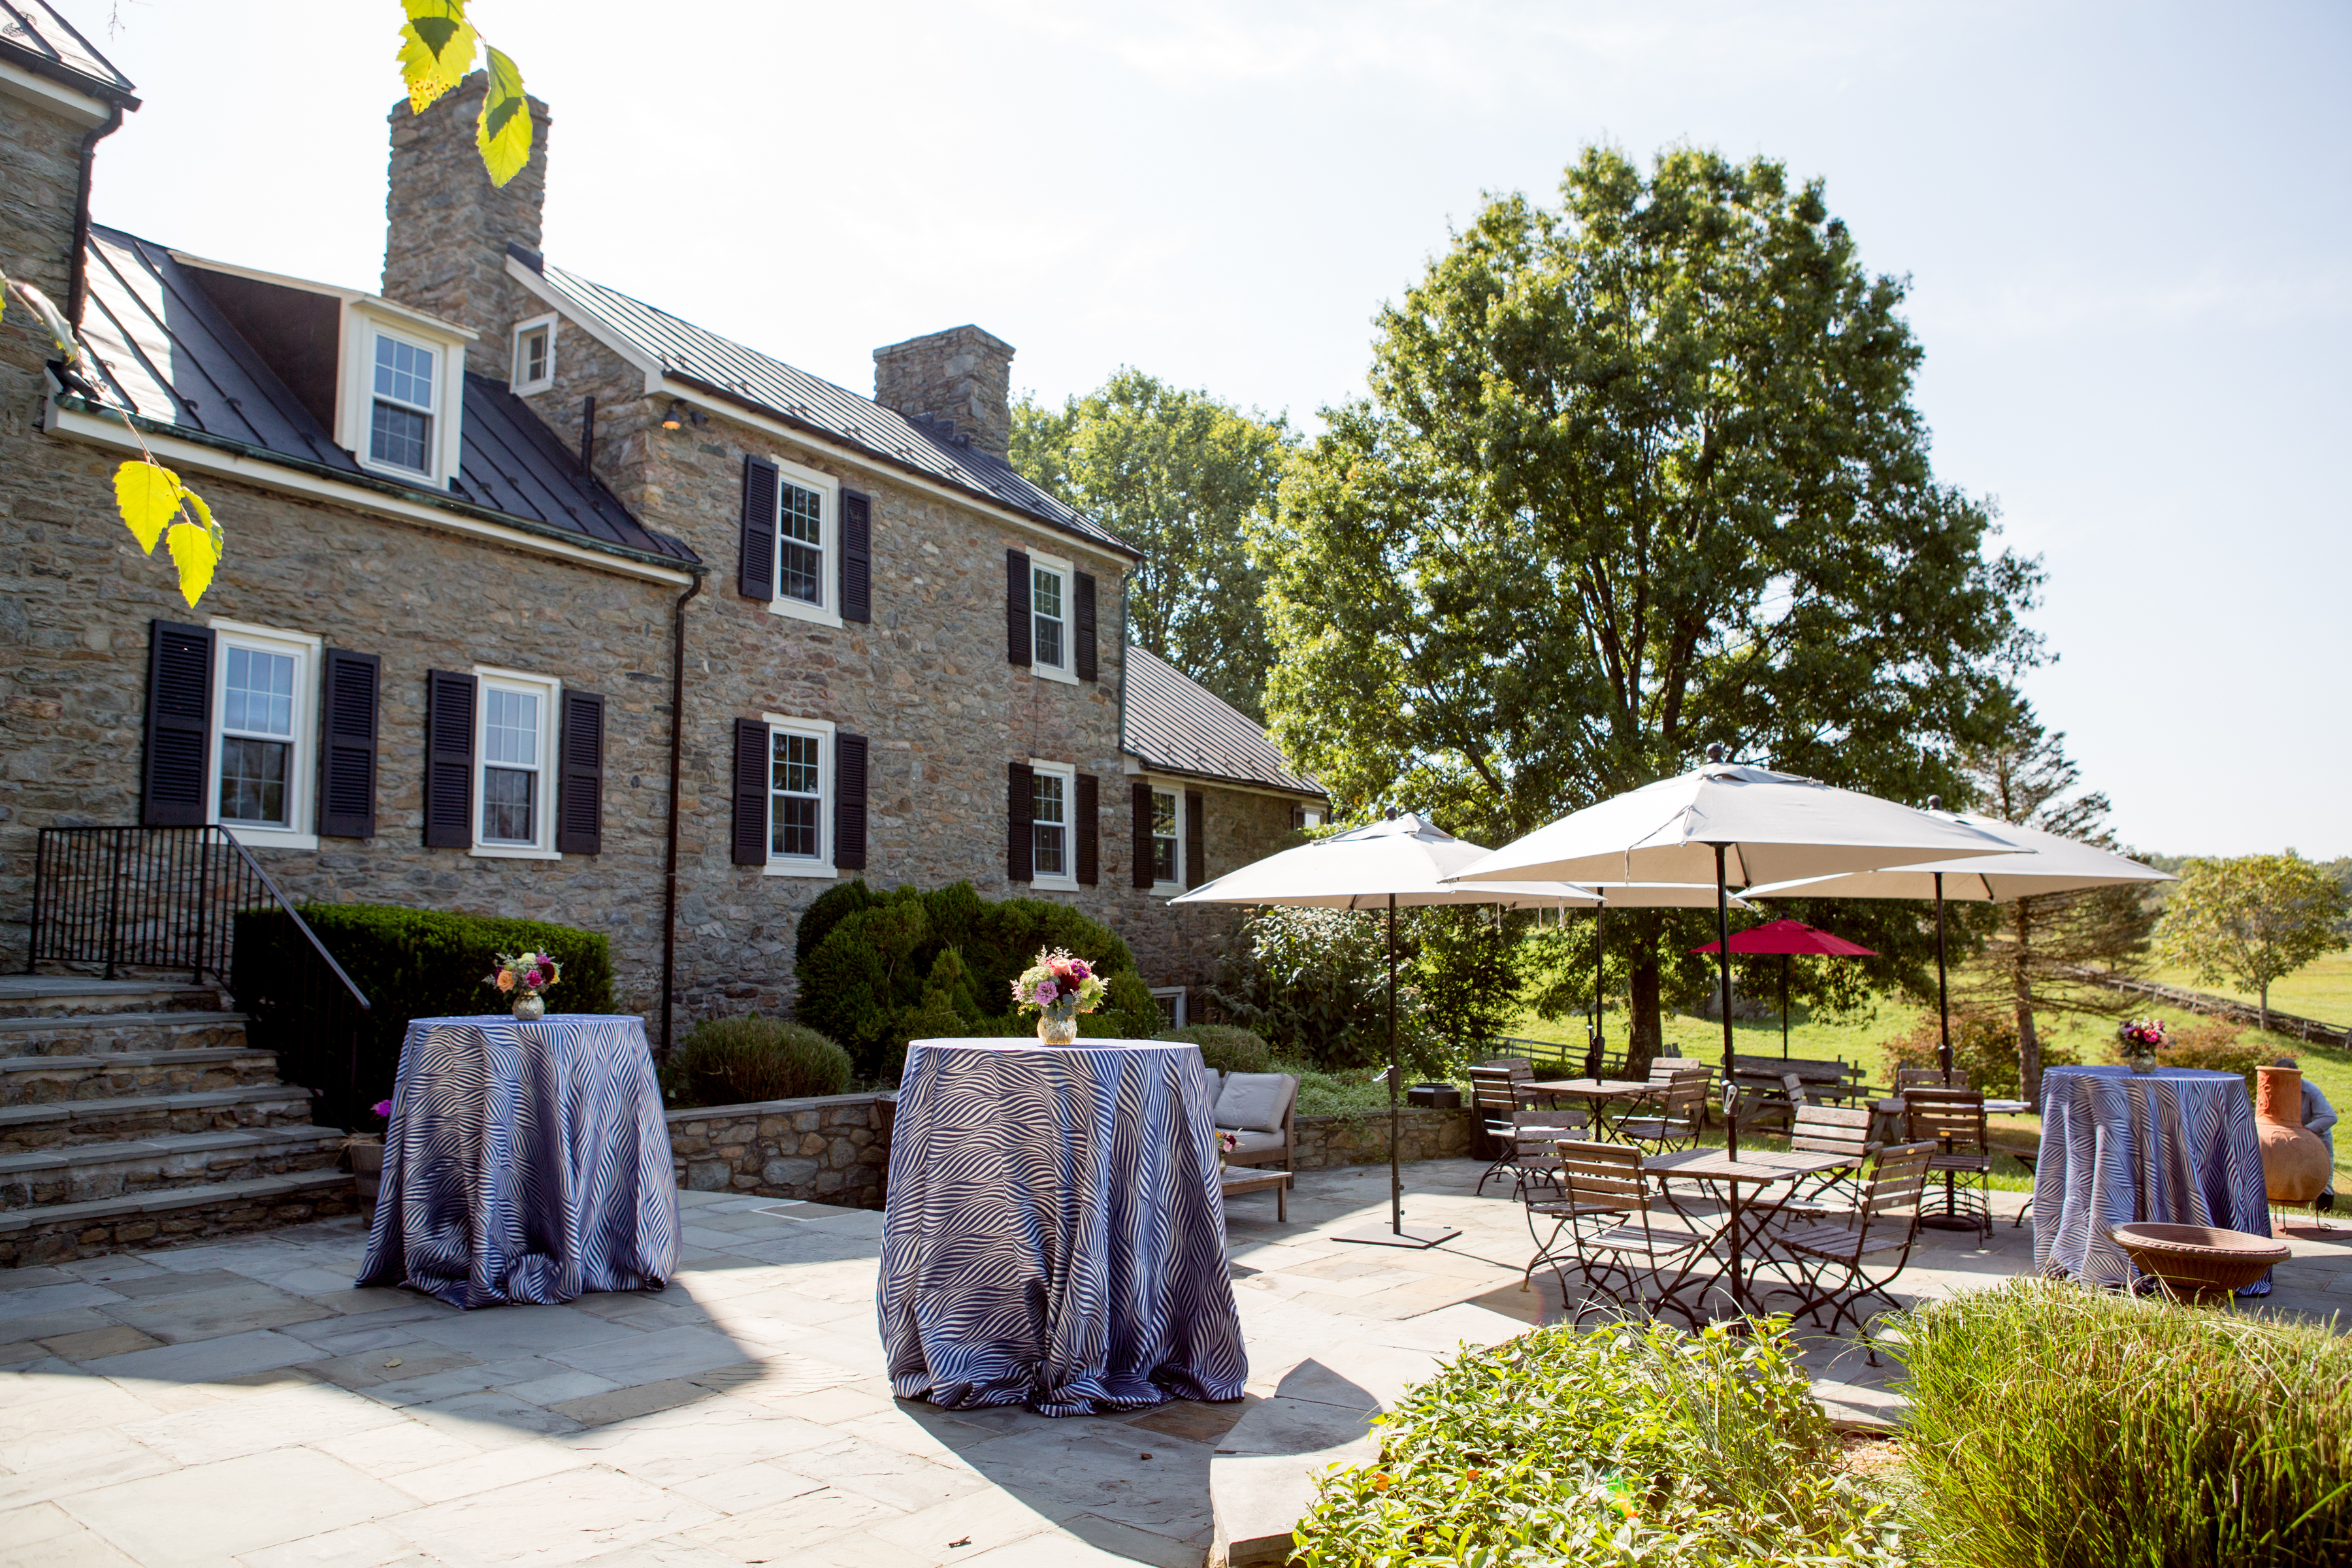 8 Tips for Hosting the Perfect Outdoor Event